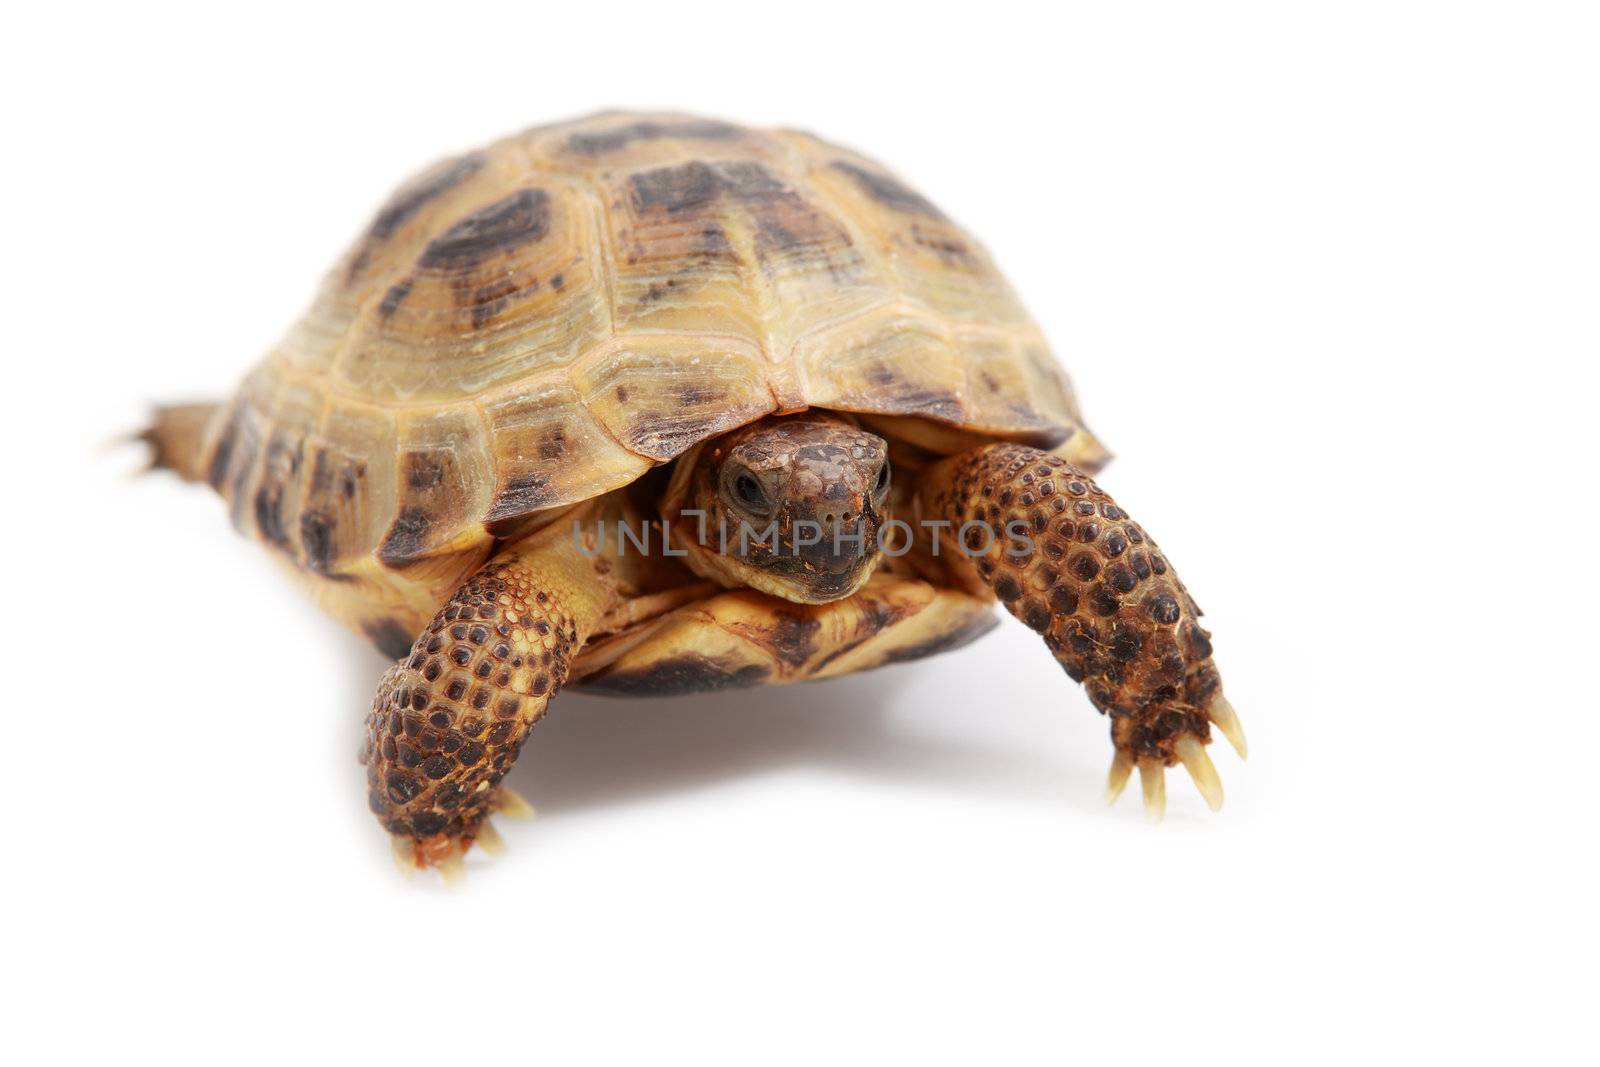 Russian tortoise, Horsfield's tortoise or Central Asian tortoise by catolla